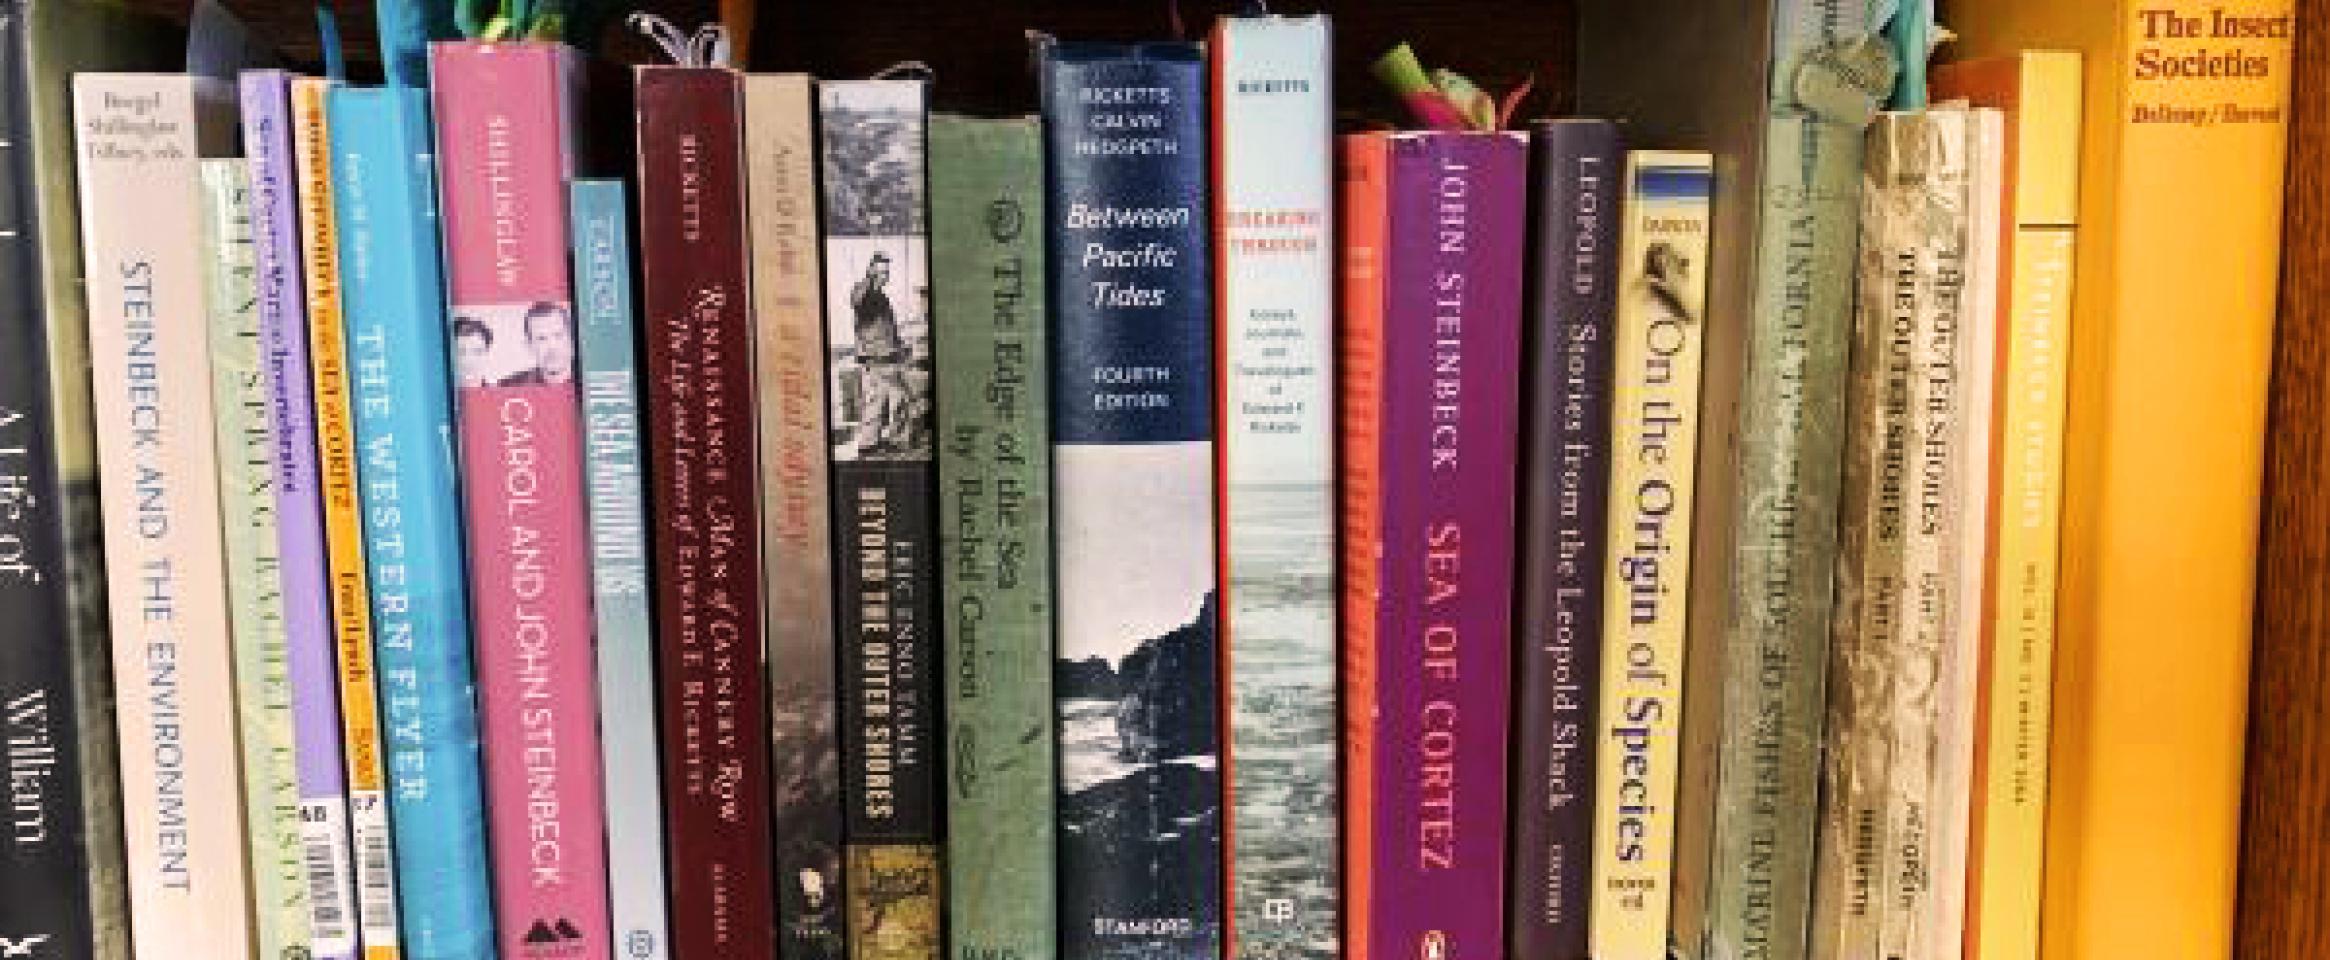 Horizontal photo of a bookshelf of Liz Lee Heinecke, featuring titles on conservation, ecology, and evolution. Photo by Liz Lee Heinecke